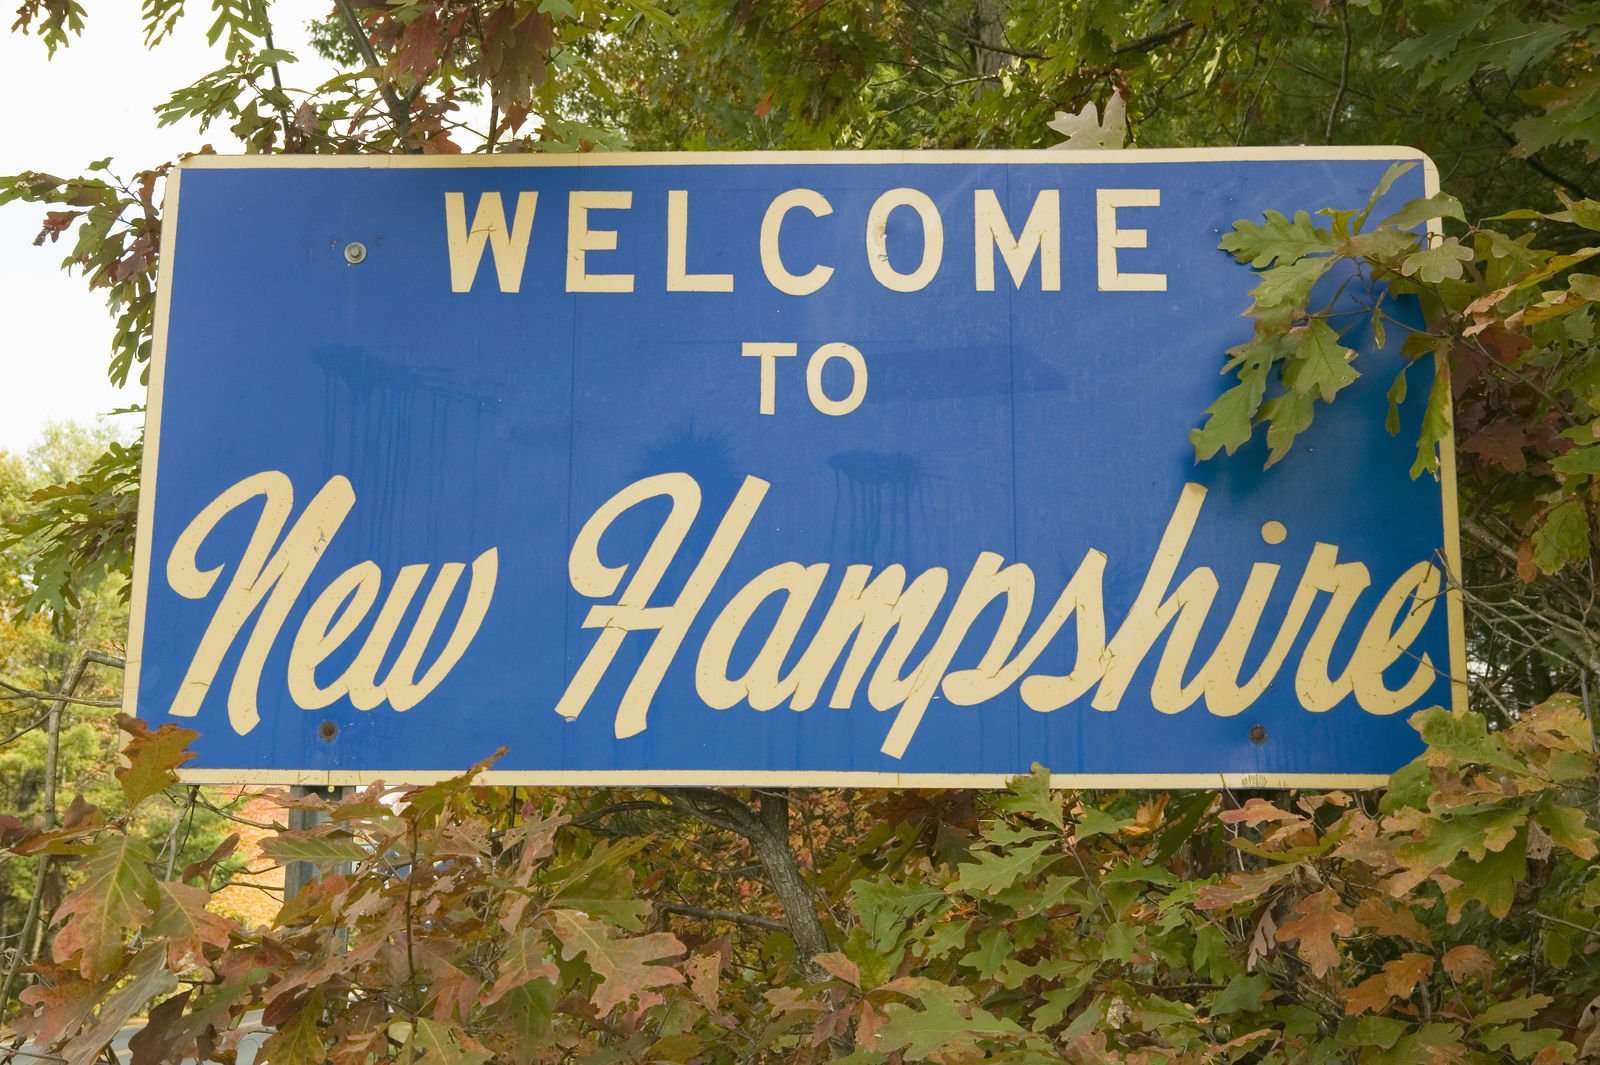 New Hampshire Windshield Insurance: What are the Full Glass coverage laws in New Hampshire?